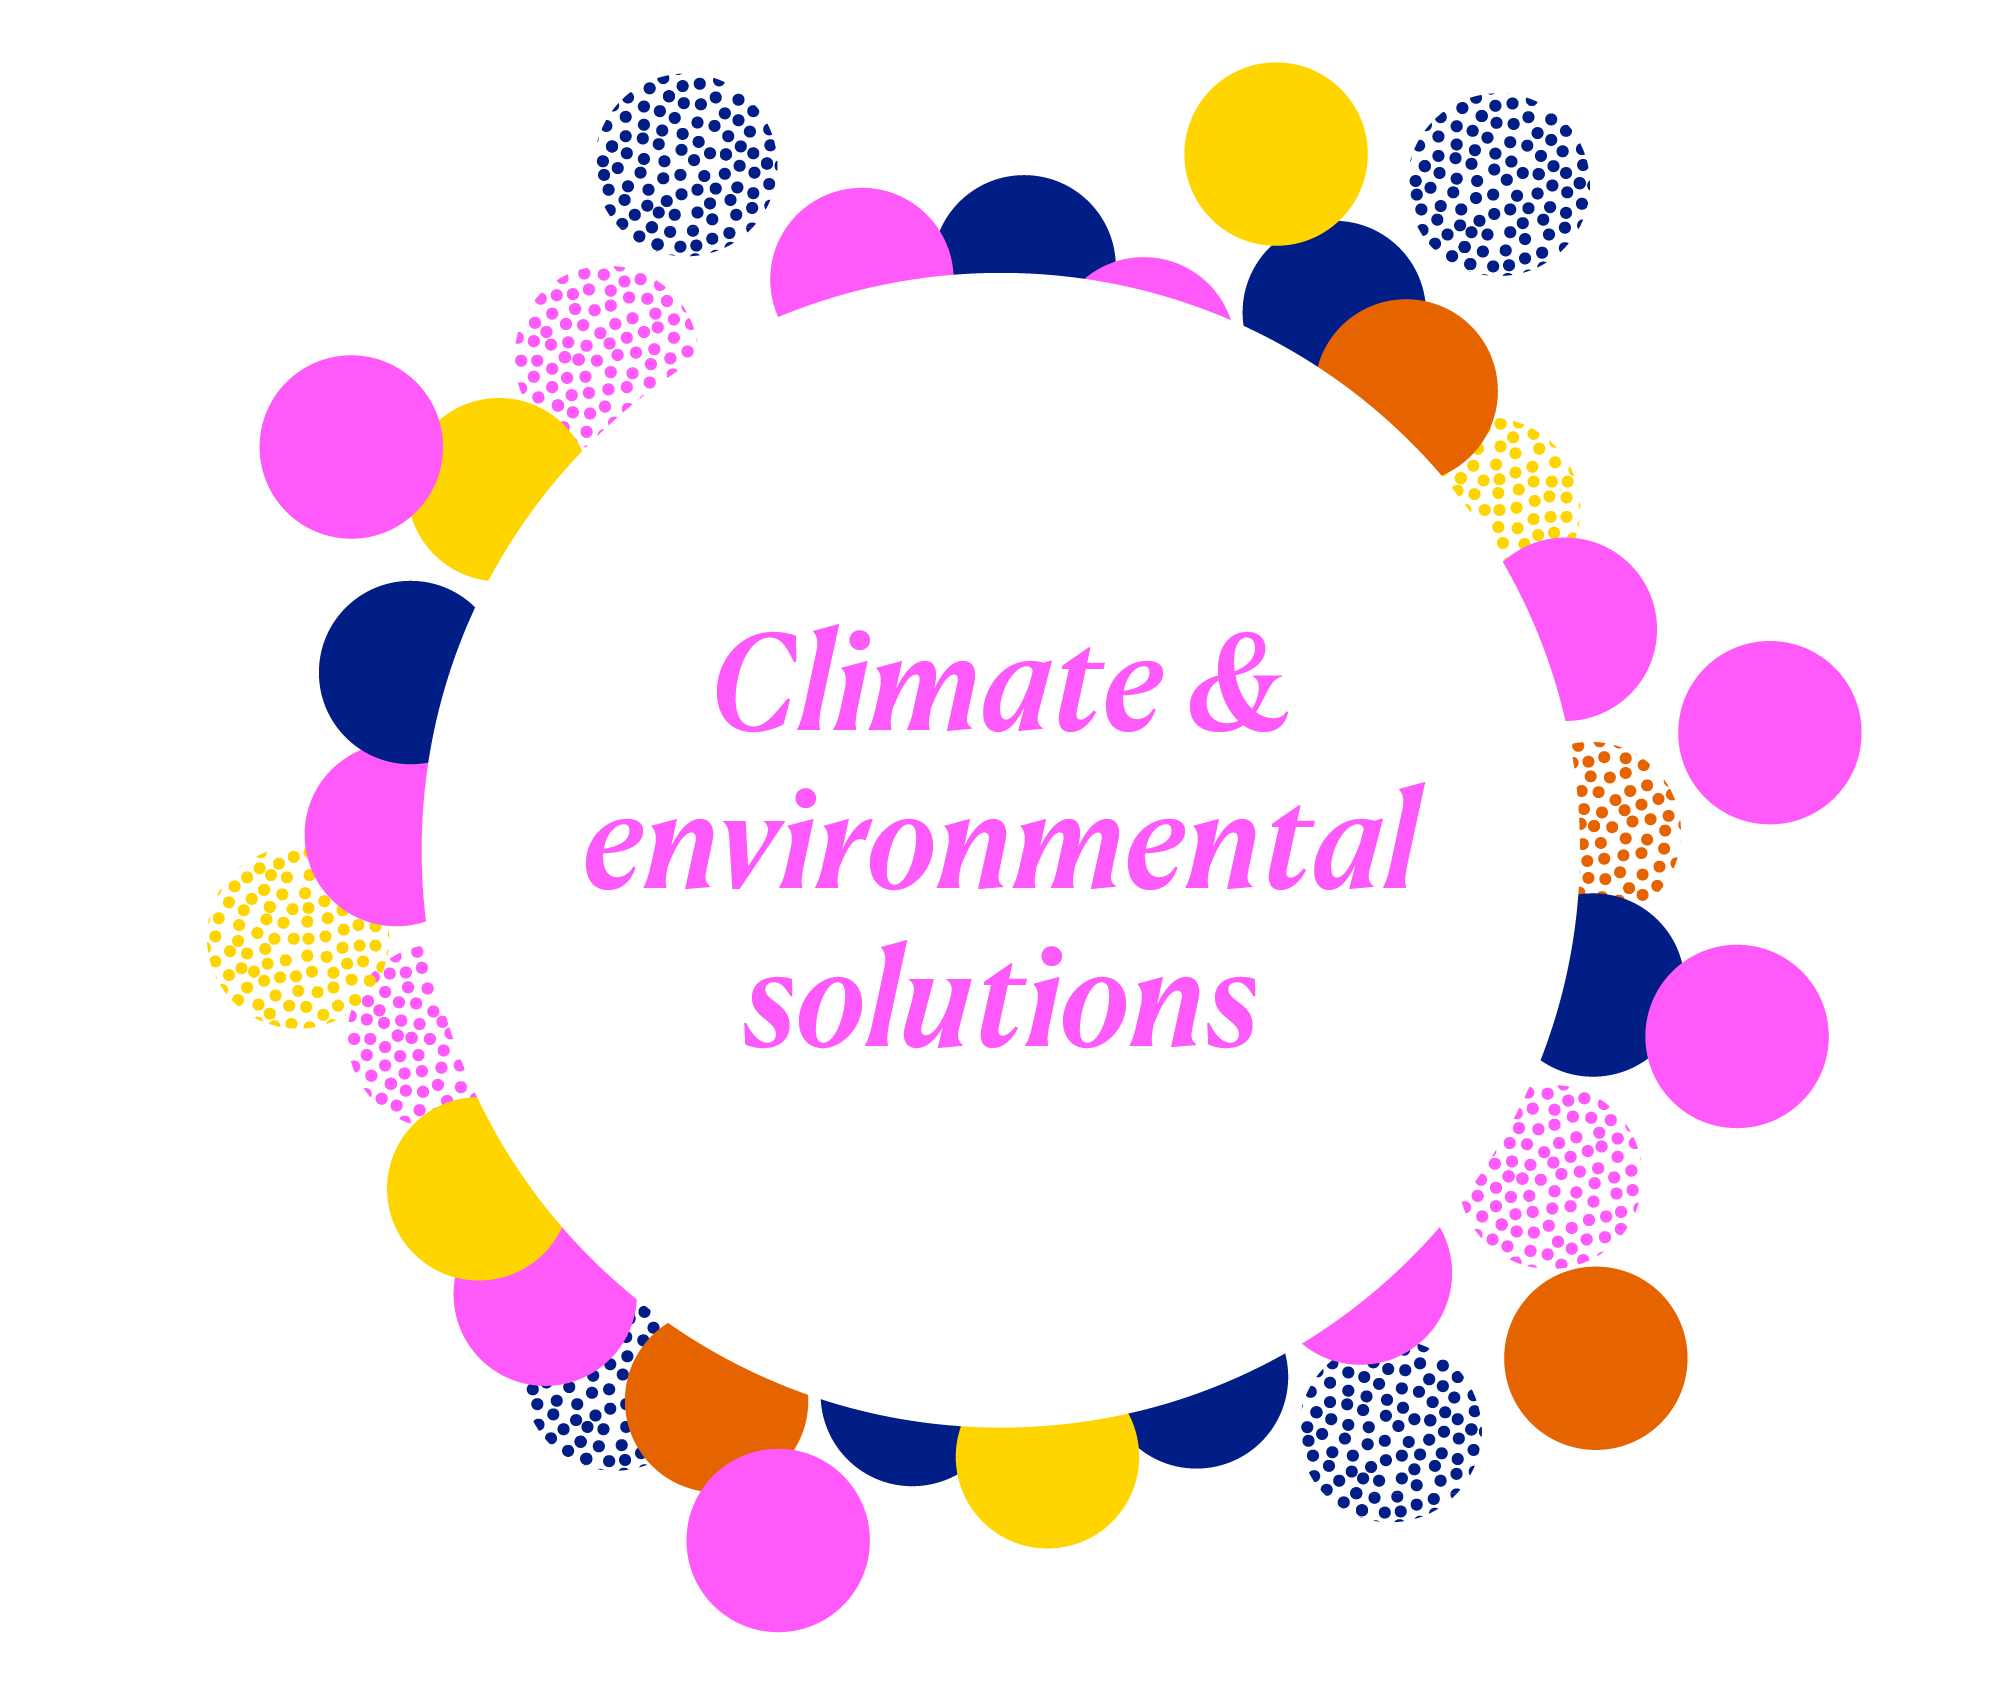 Climate & environmental solutions